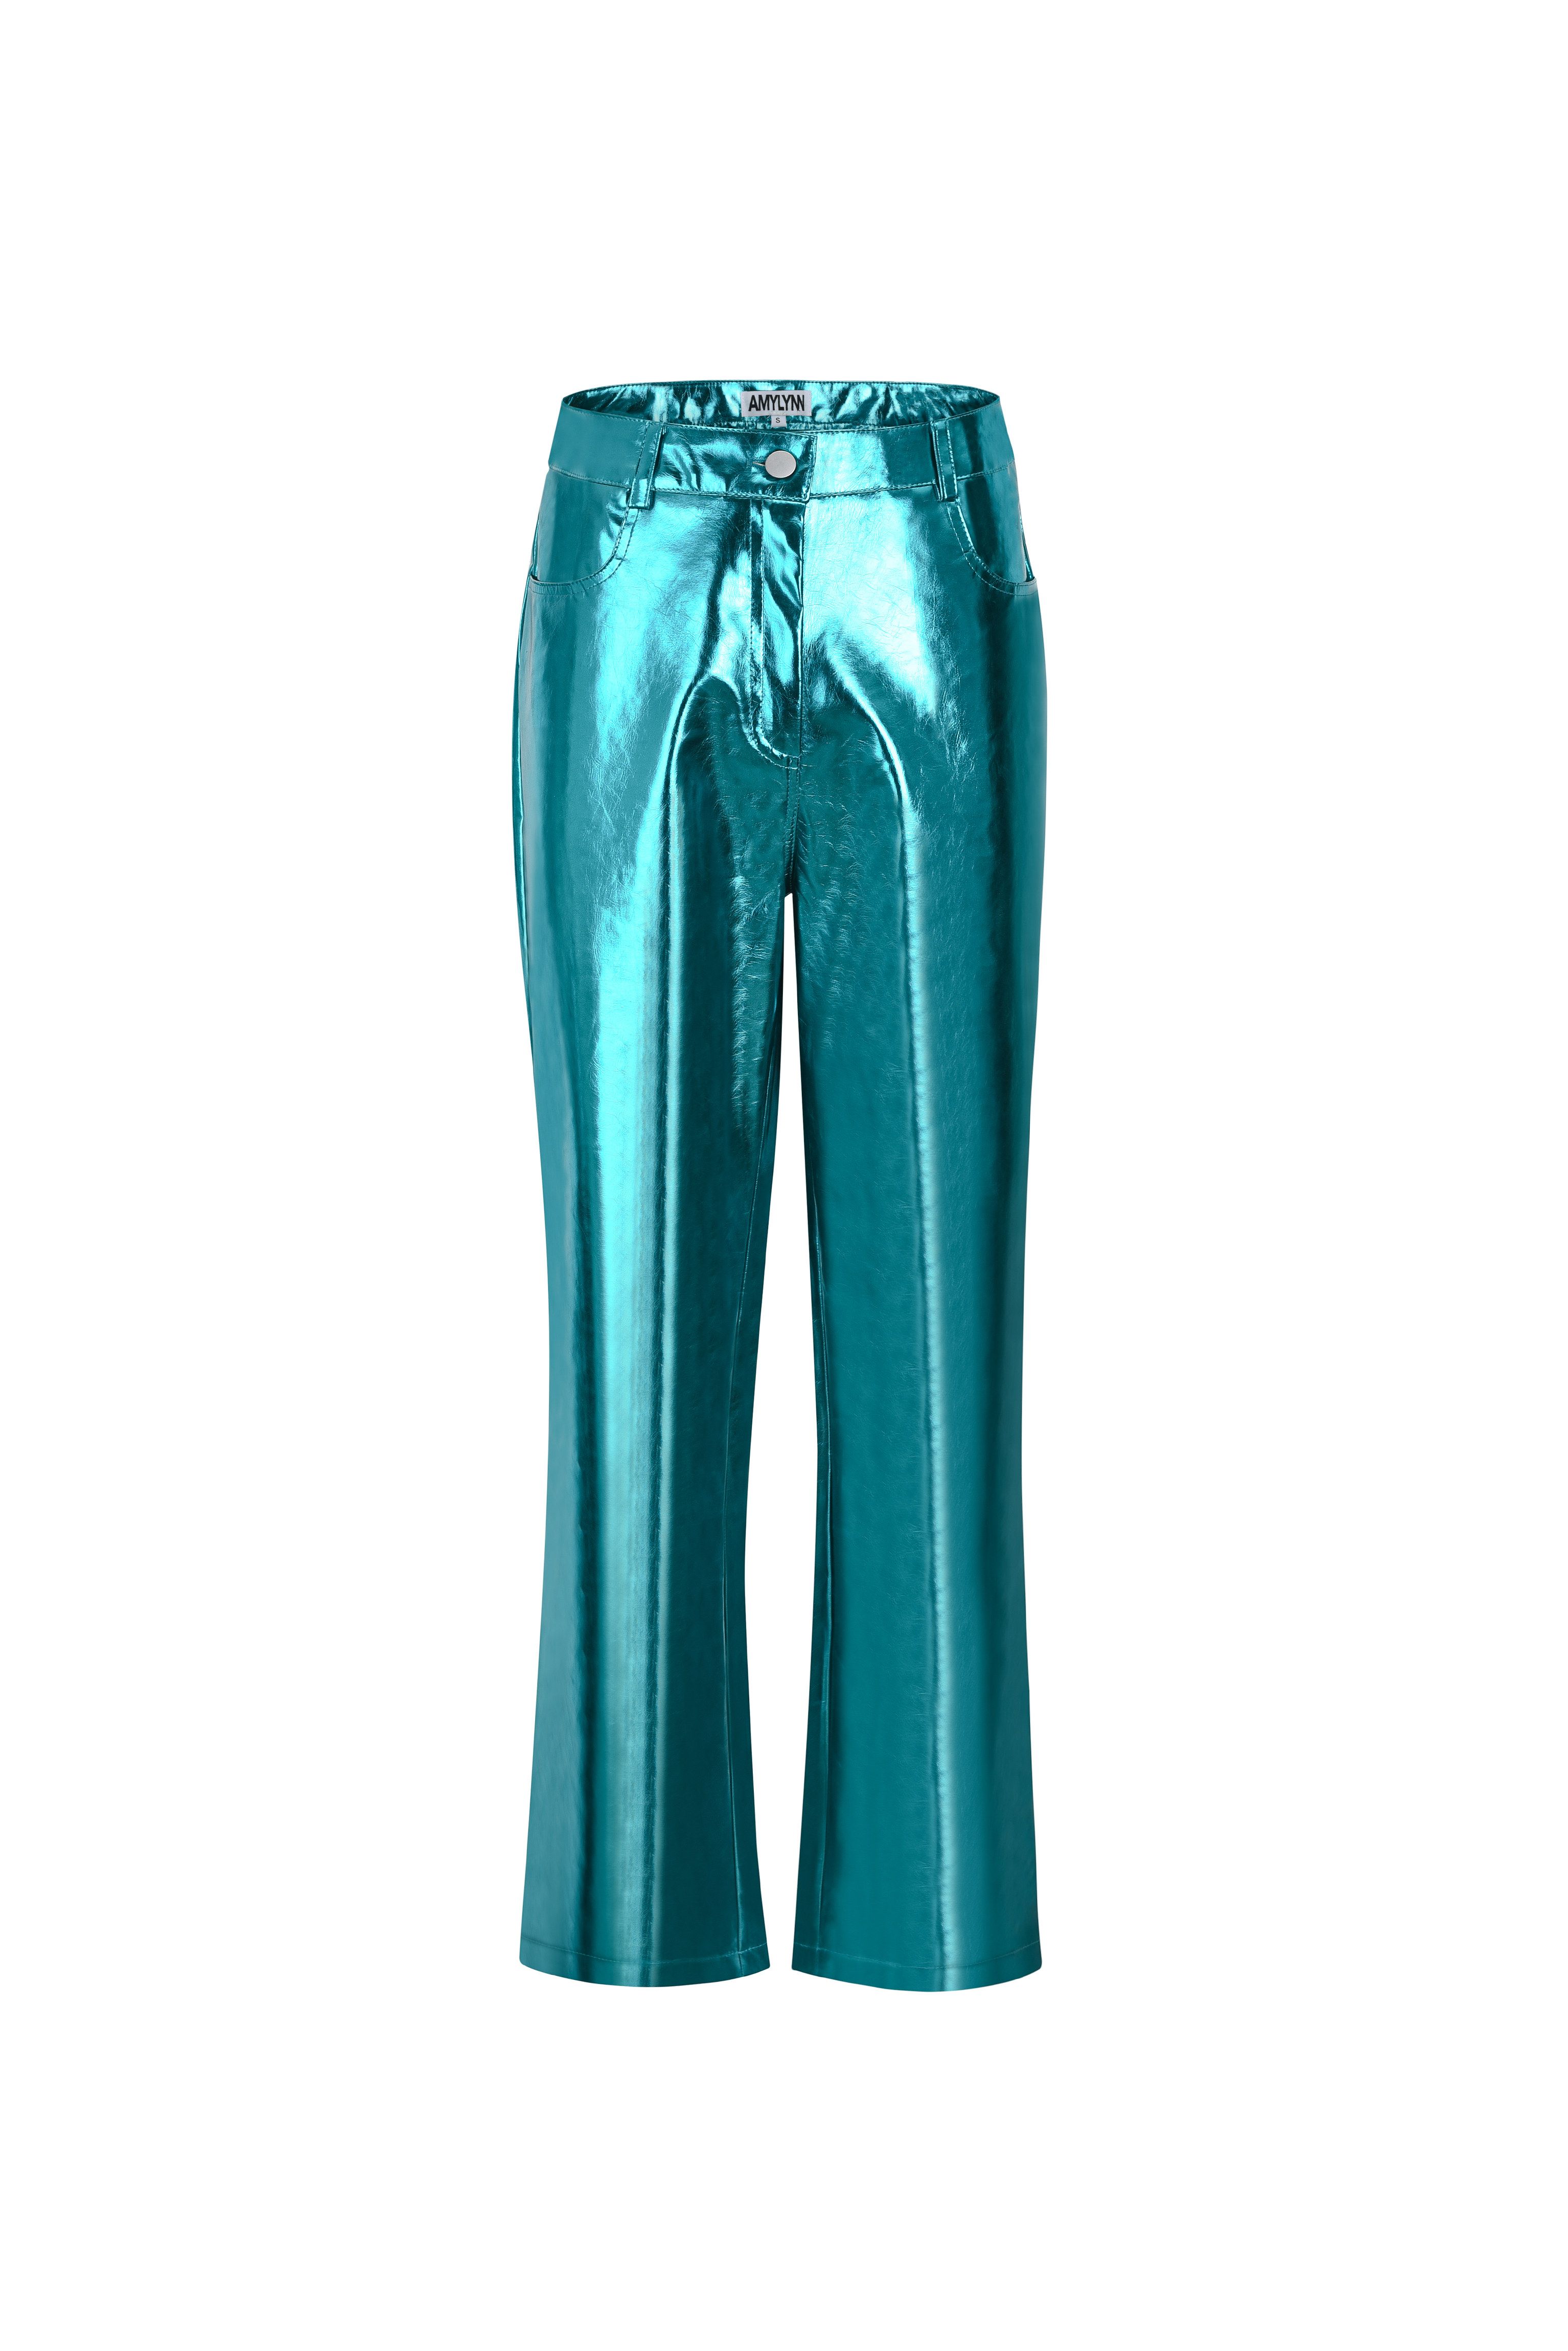 Lupe Blue Metallic PU Trousers | Wolf & Badger (US)